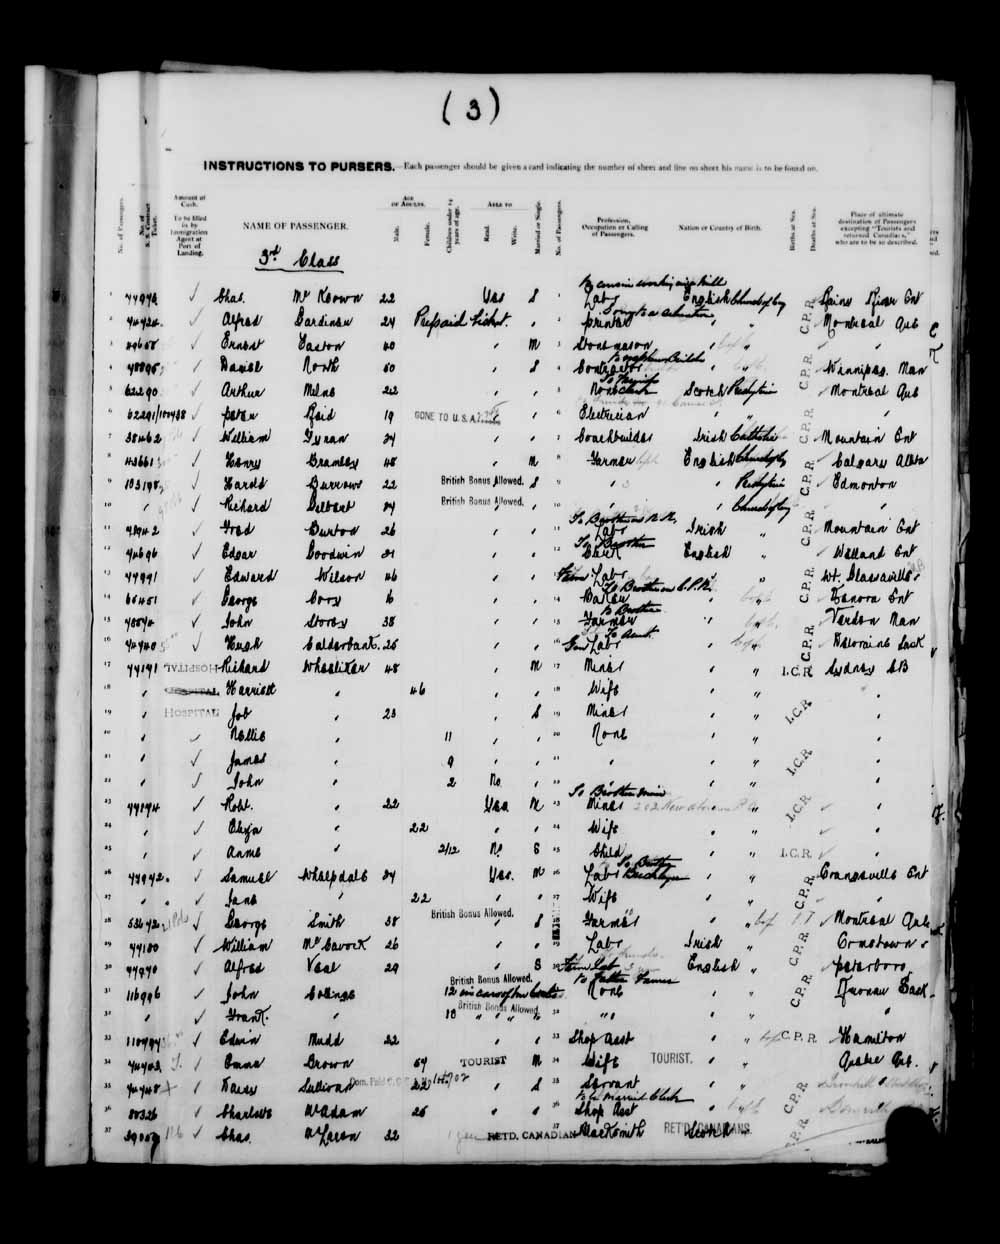 Digitized page of Quebec Passenger Lists for Image No.: e003591253